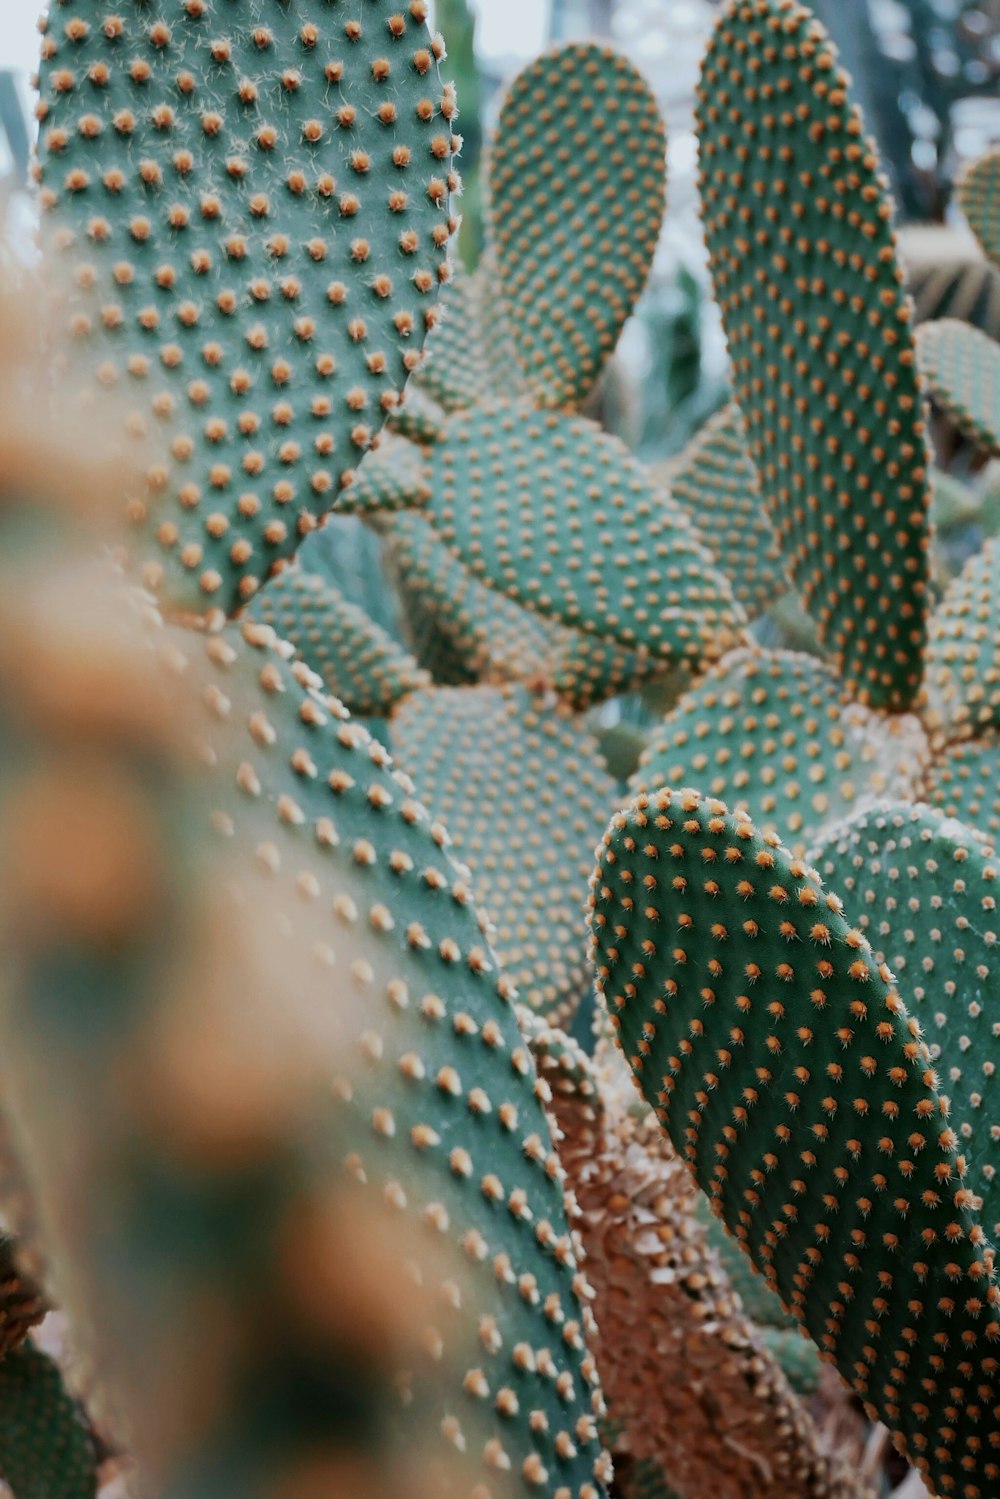 close up photo of green cactus during daytime